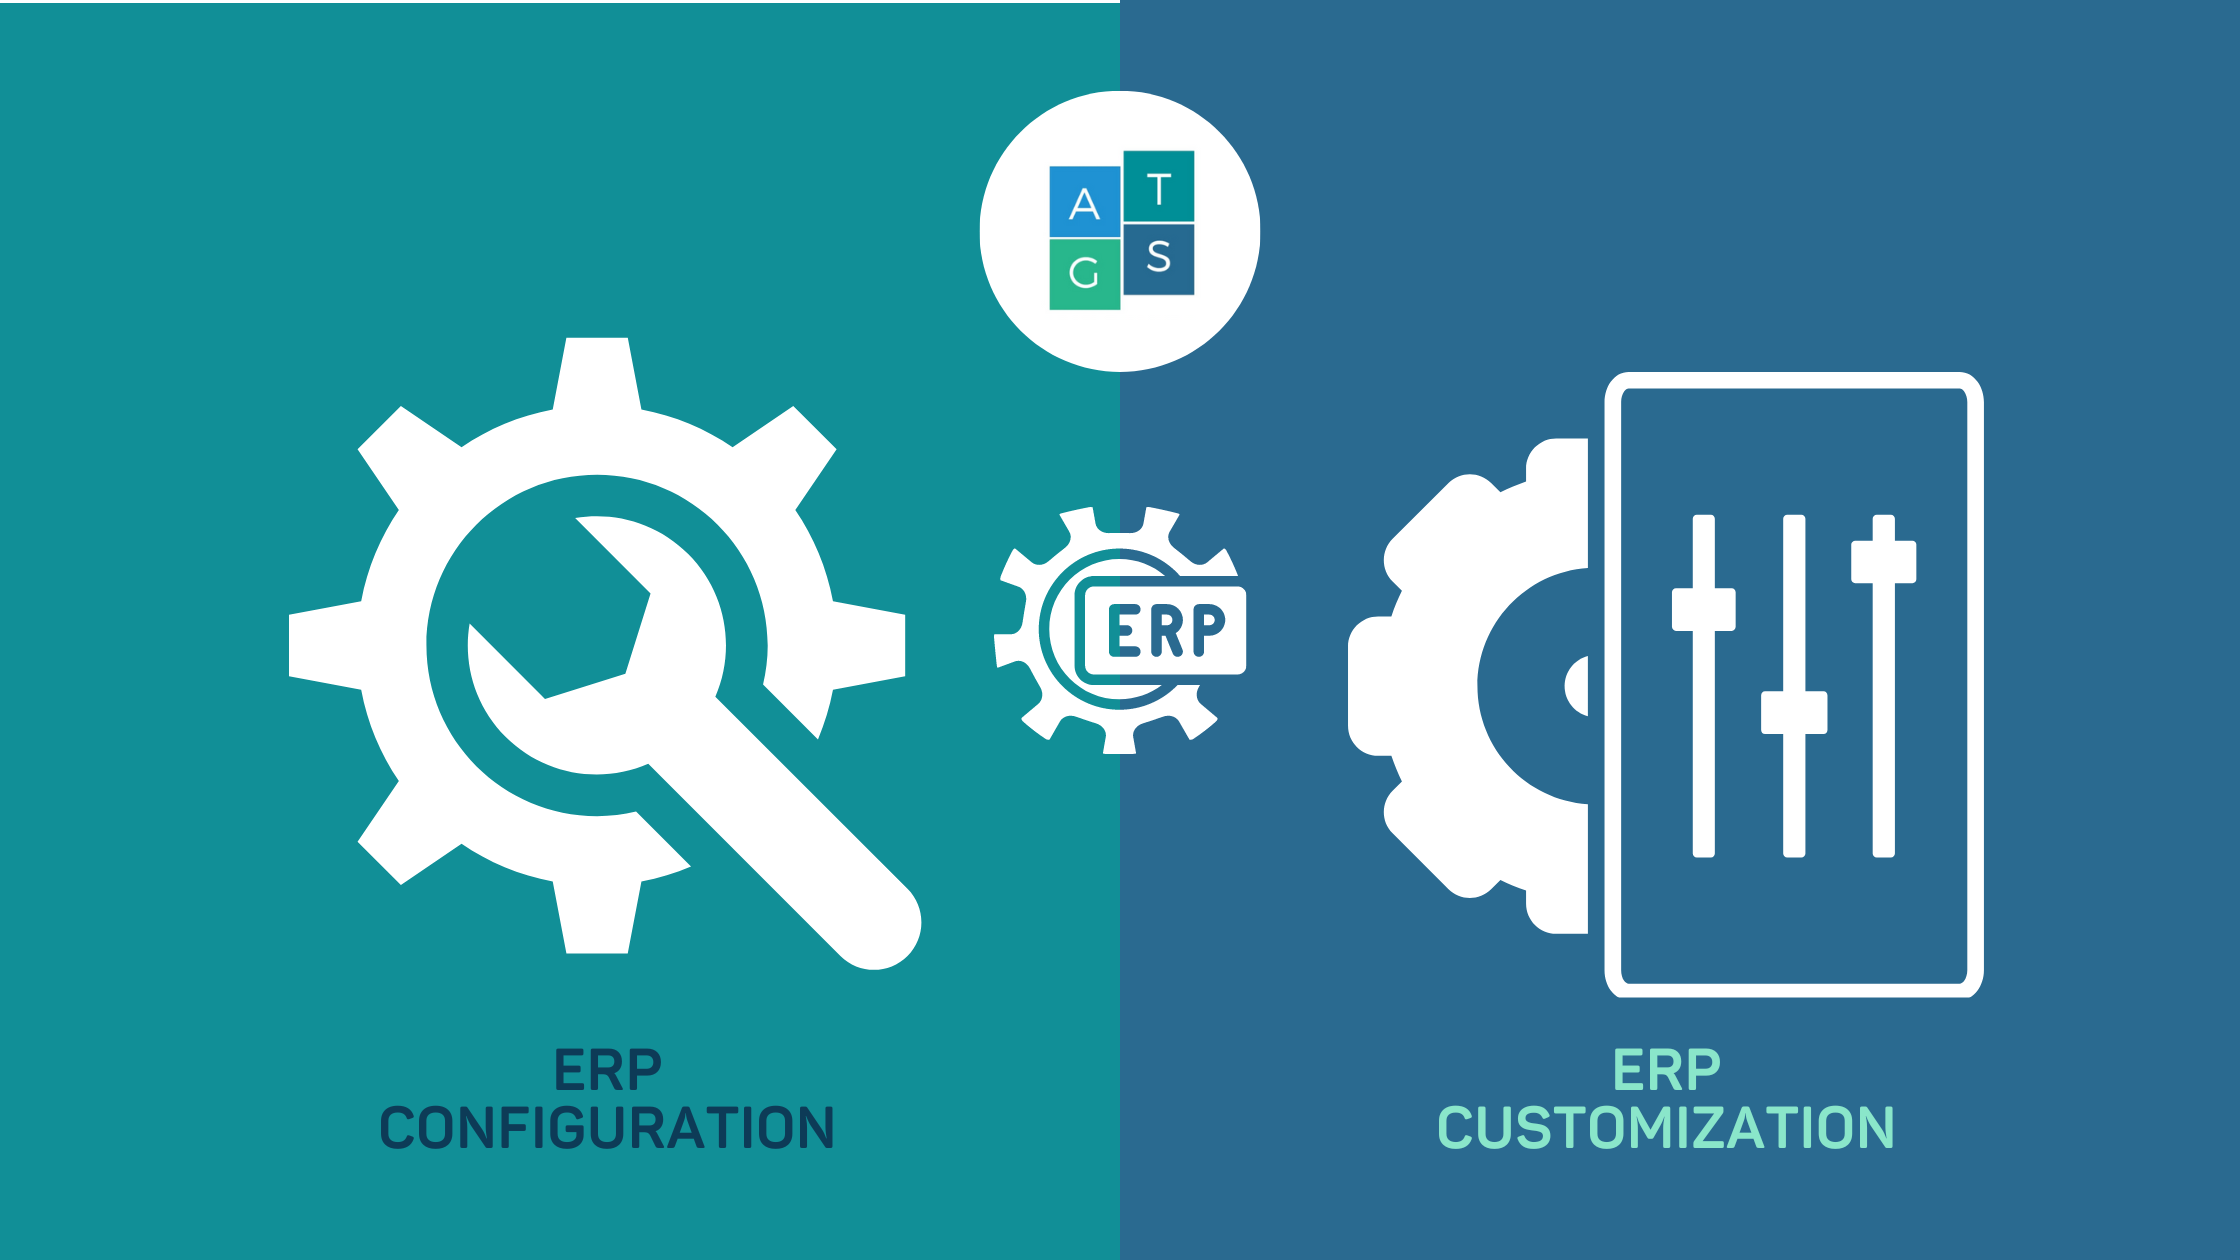 What is the difference between customizing an ERP and configuring it to meet specific needs?